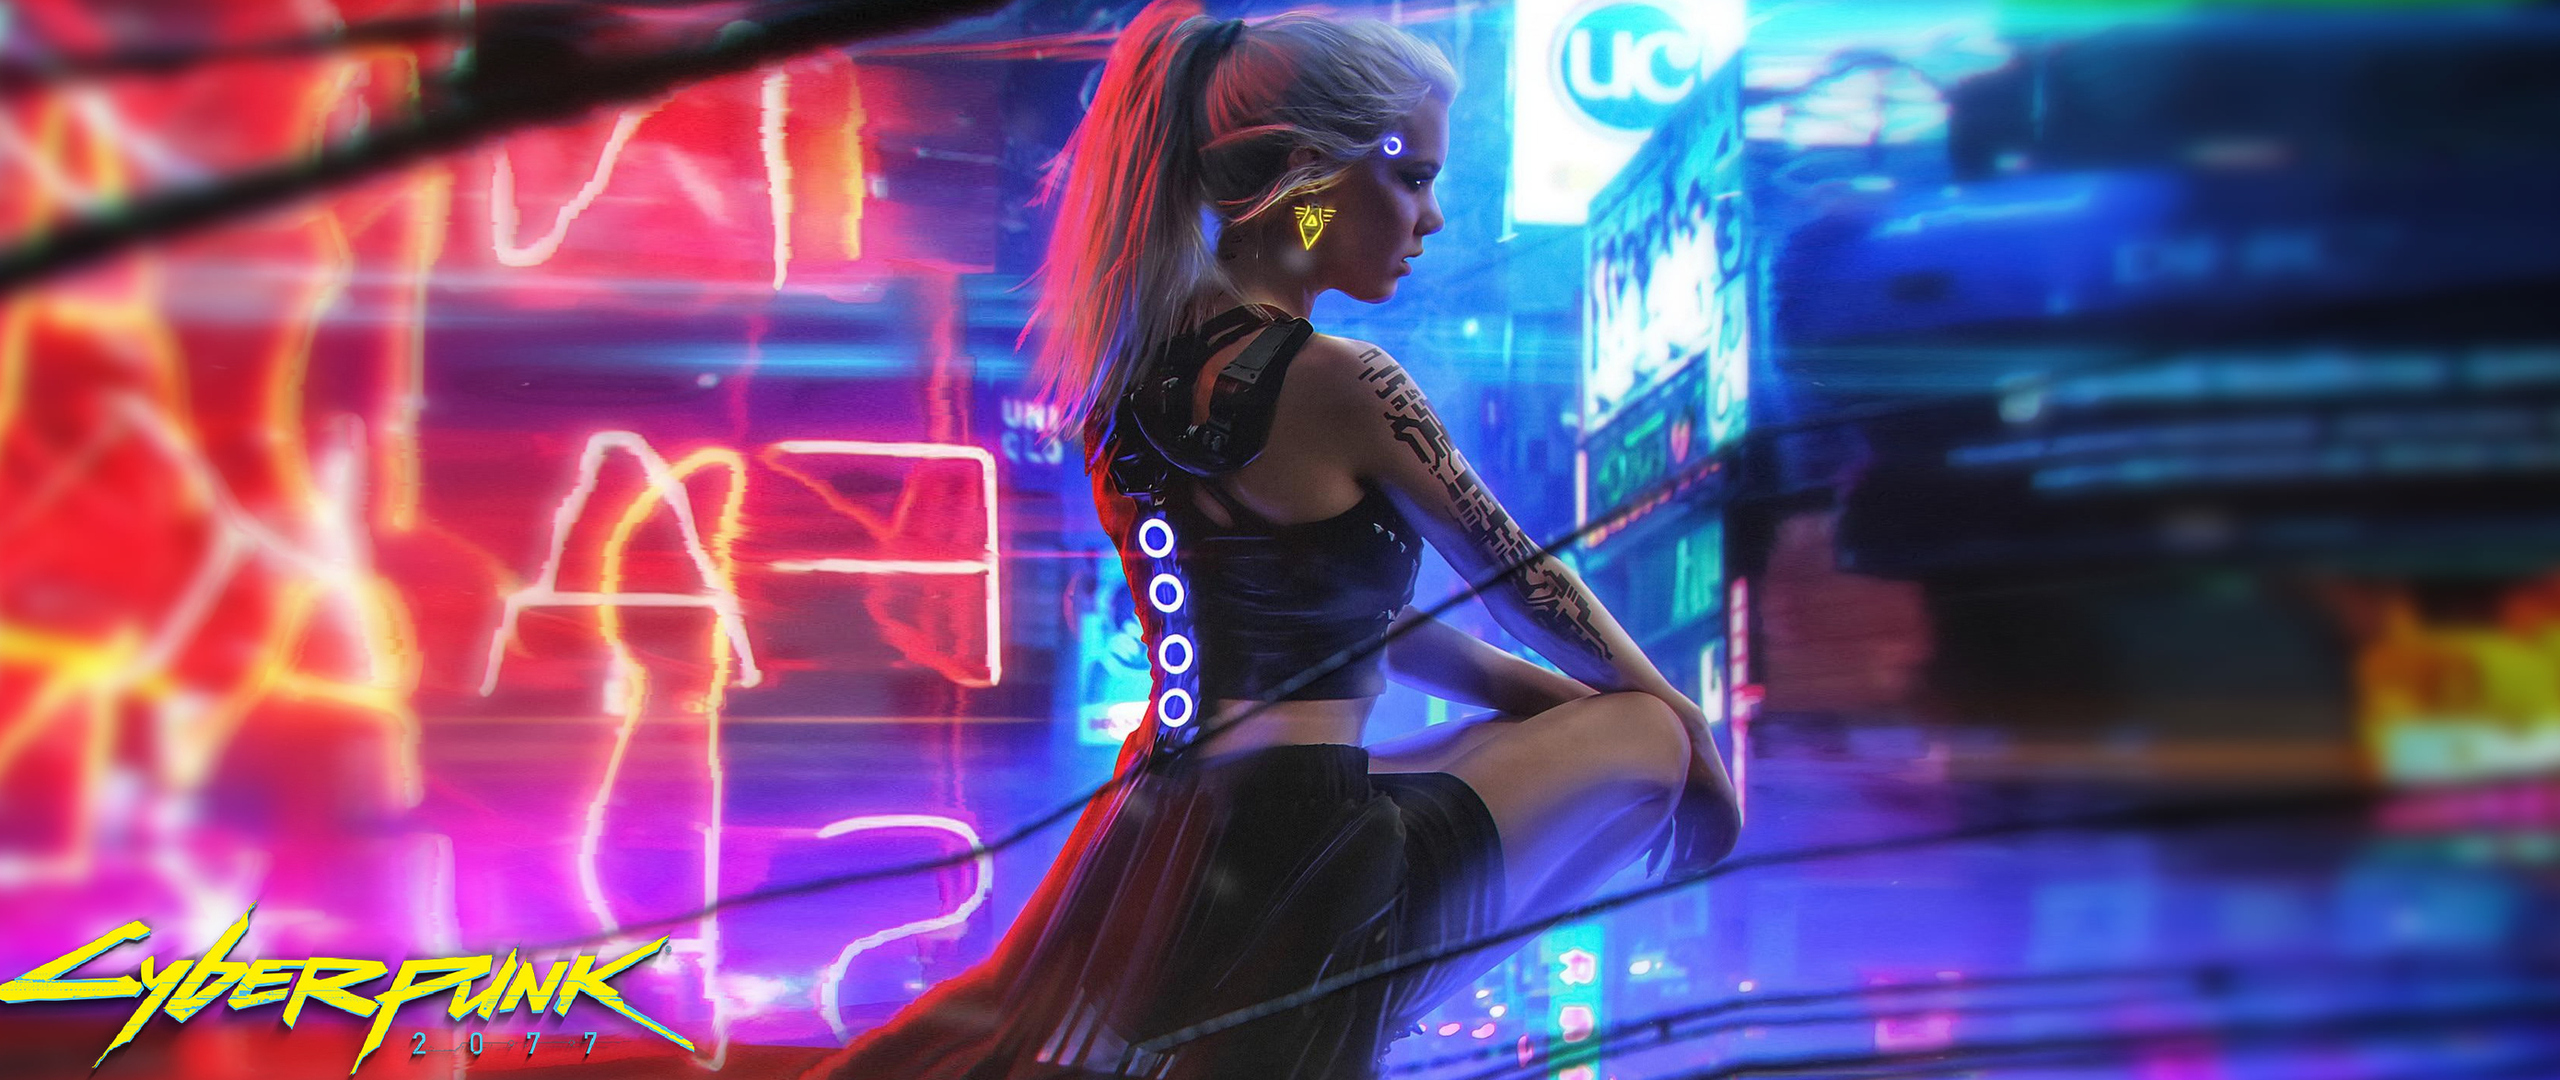 2560x1080 Cyberpunk Lamborghini Girl Alongside Wallpaper,2560x1080  Resolution HD 4k Wallpapers,Images,Backgrounds,Photos and Pictures